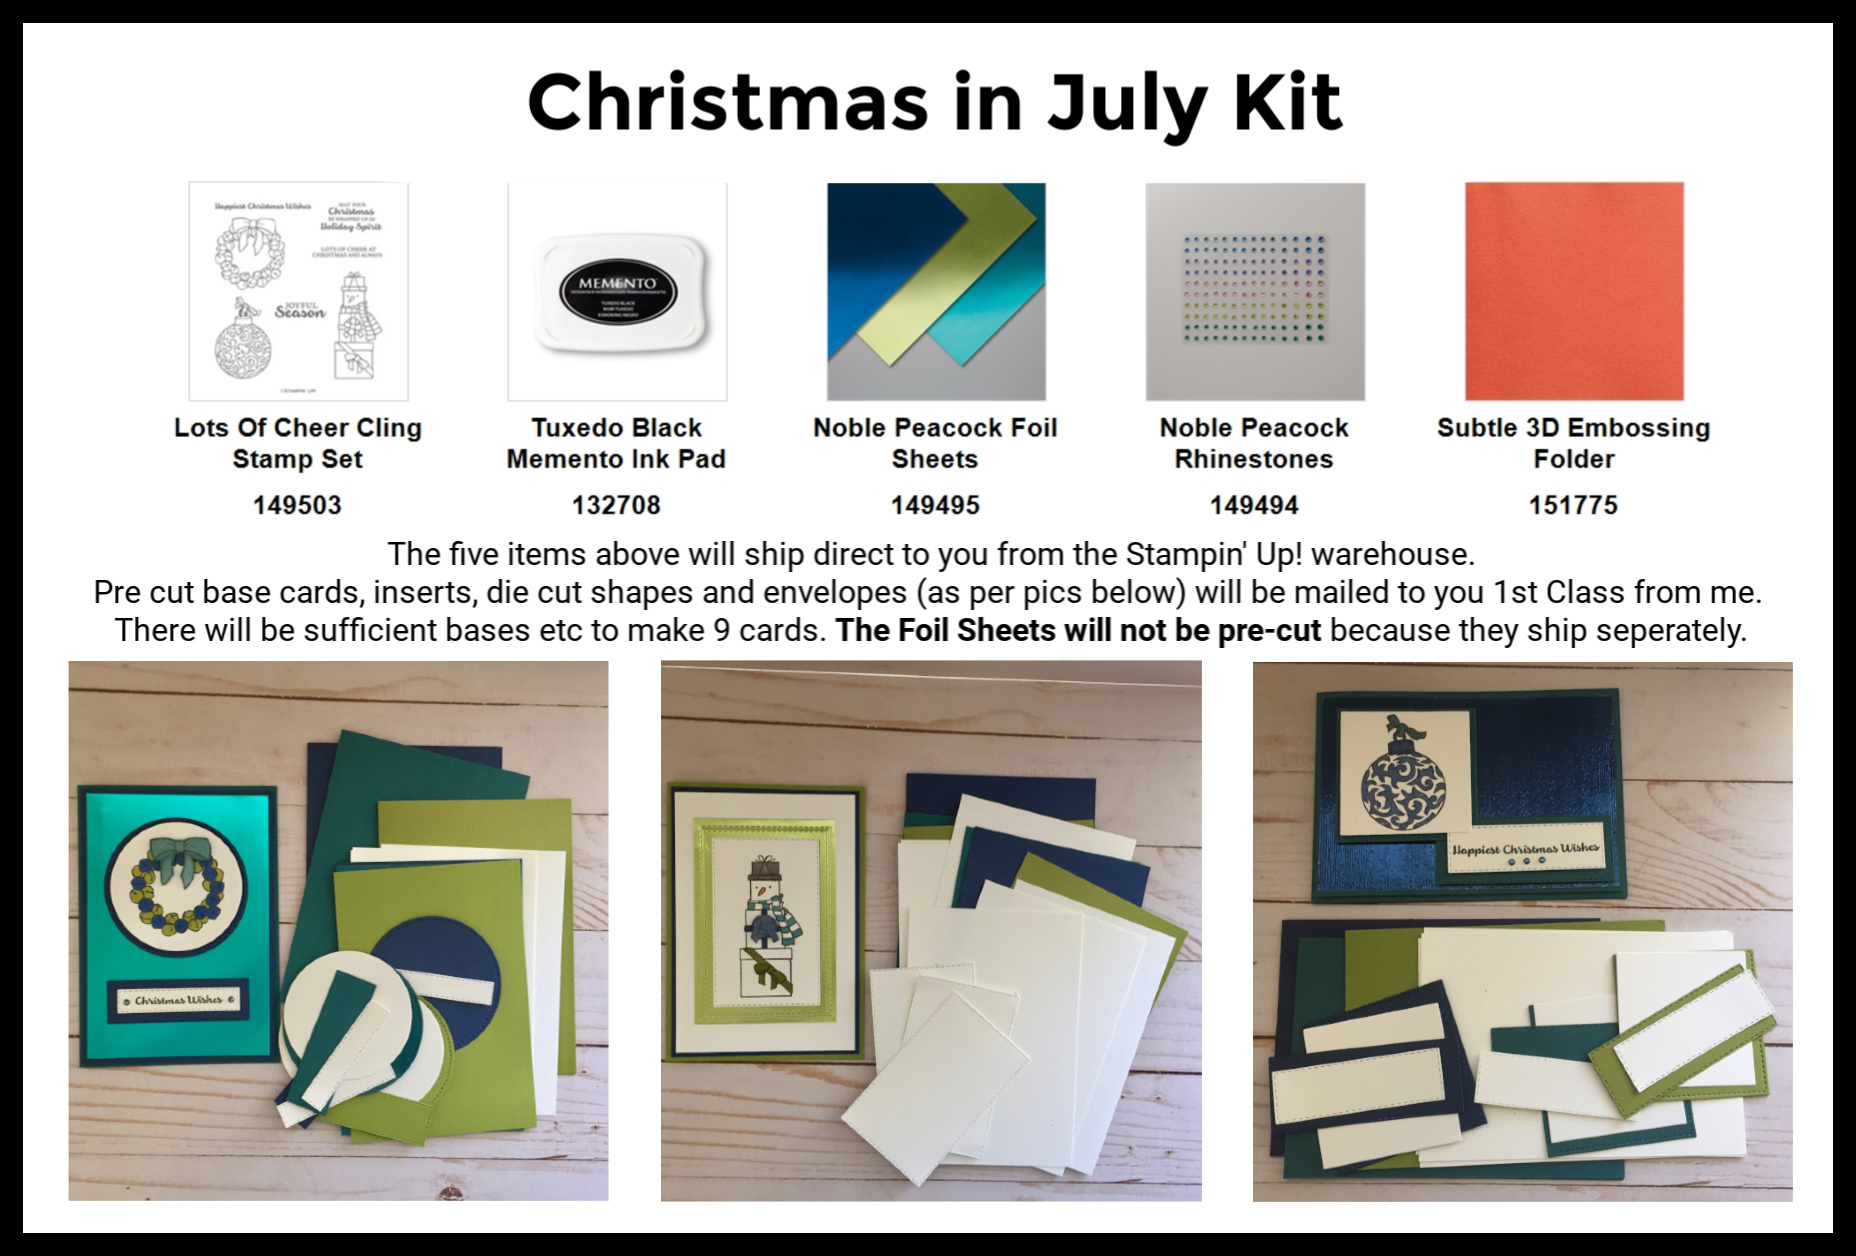 Christmas in July kit